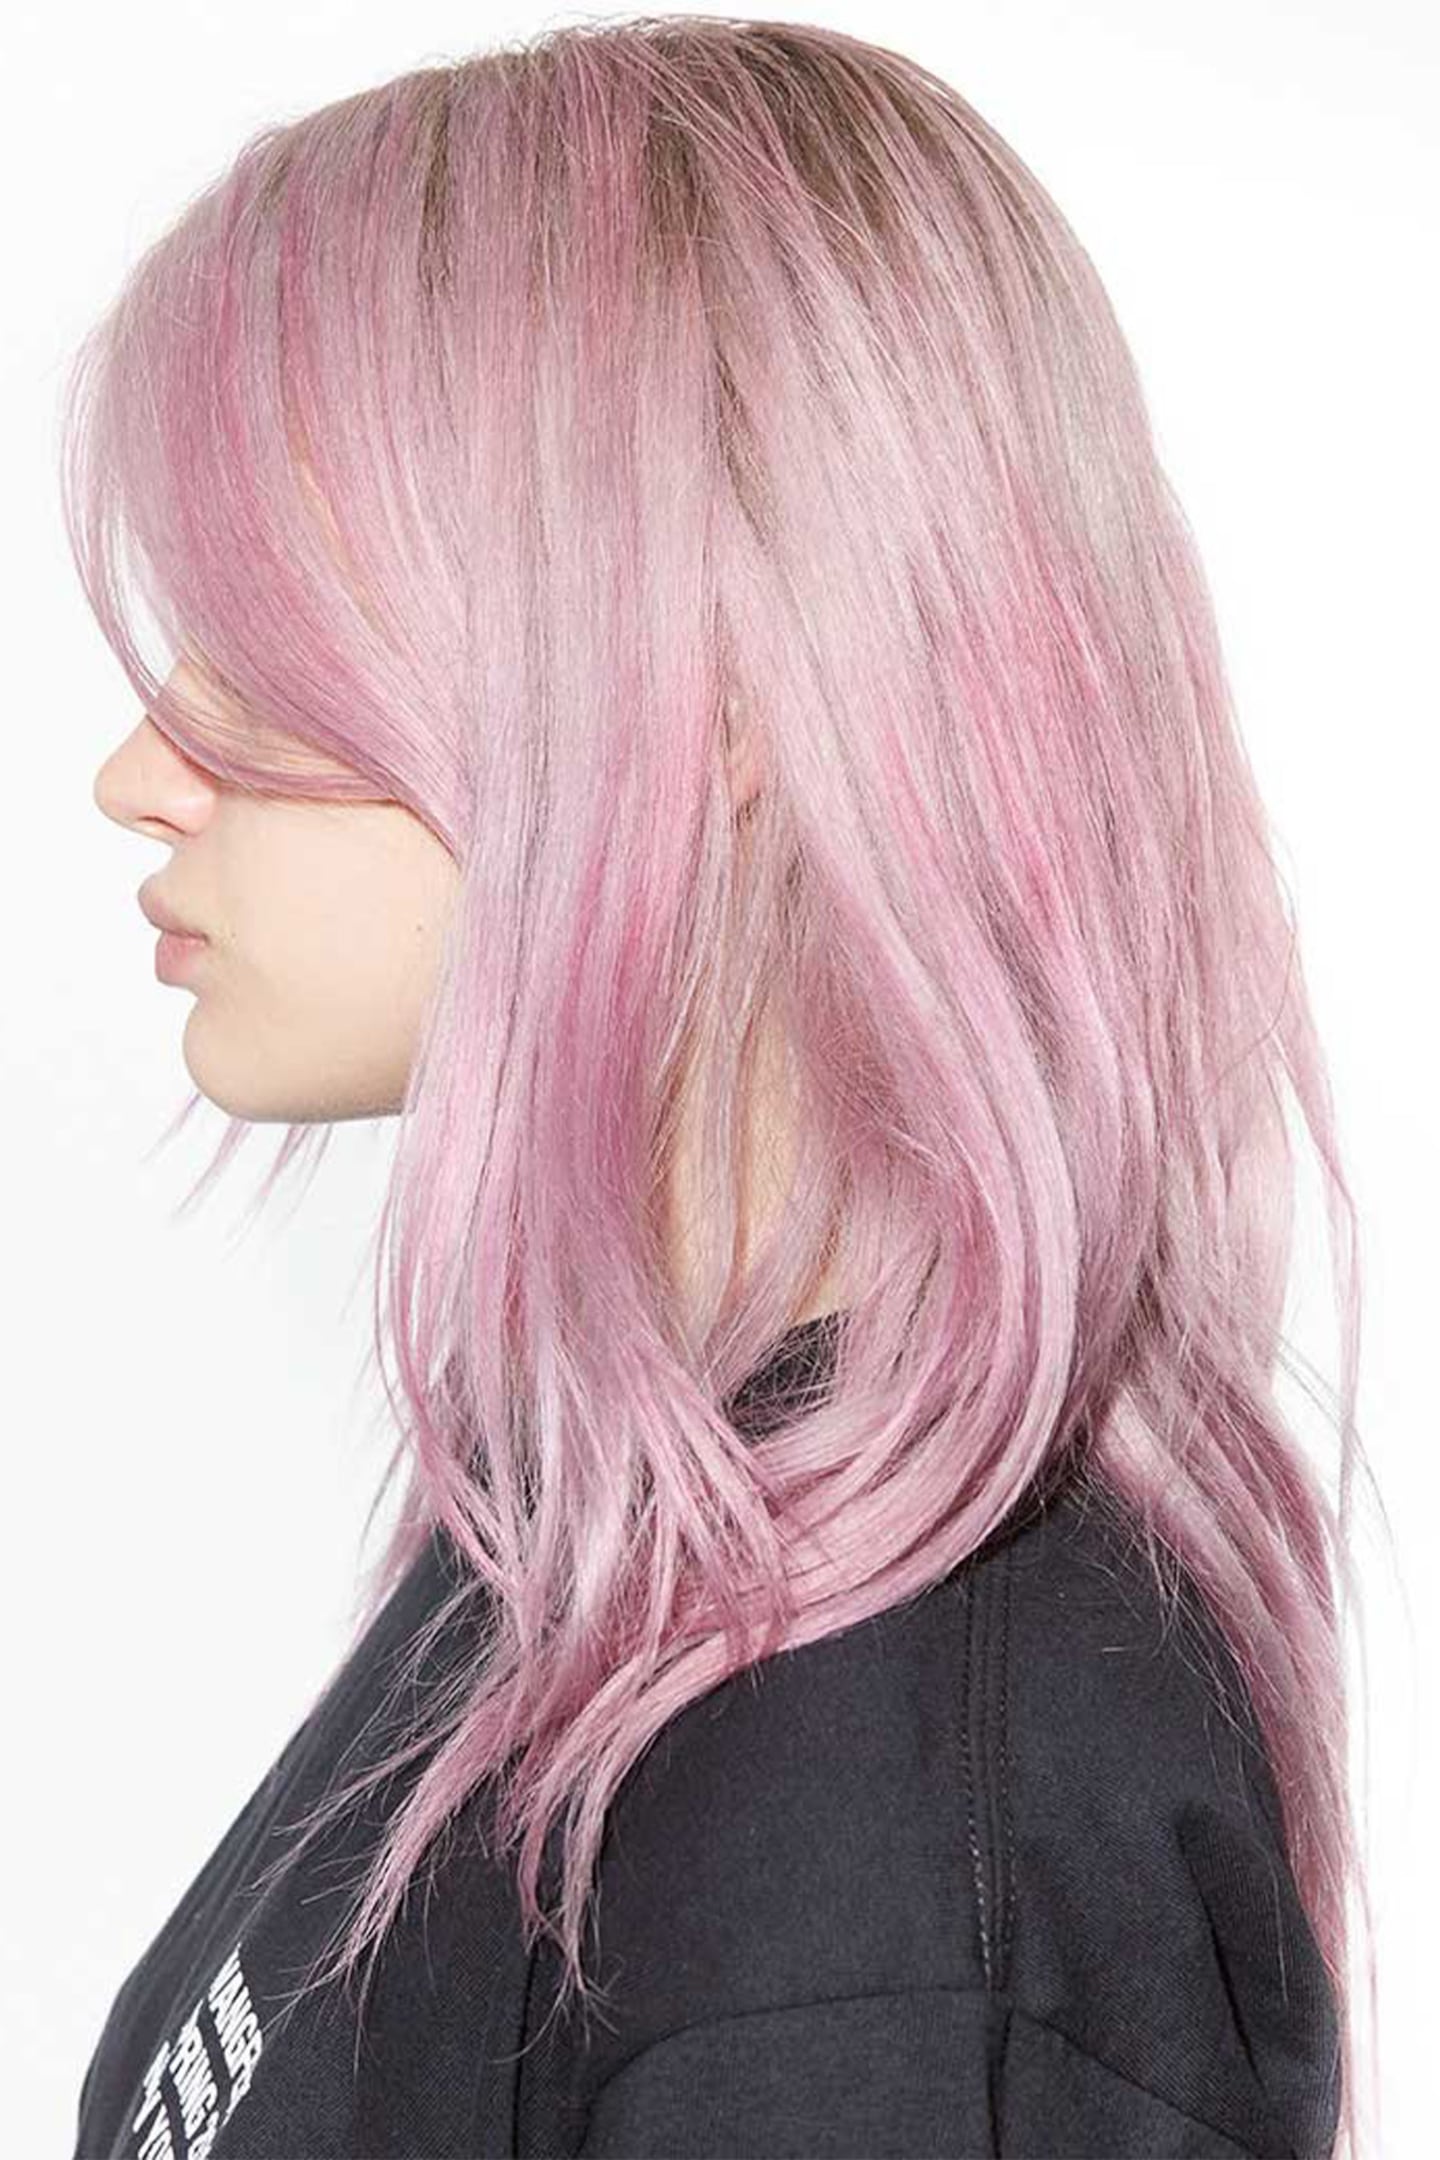 A woman with pink hair